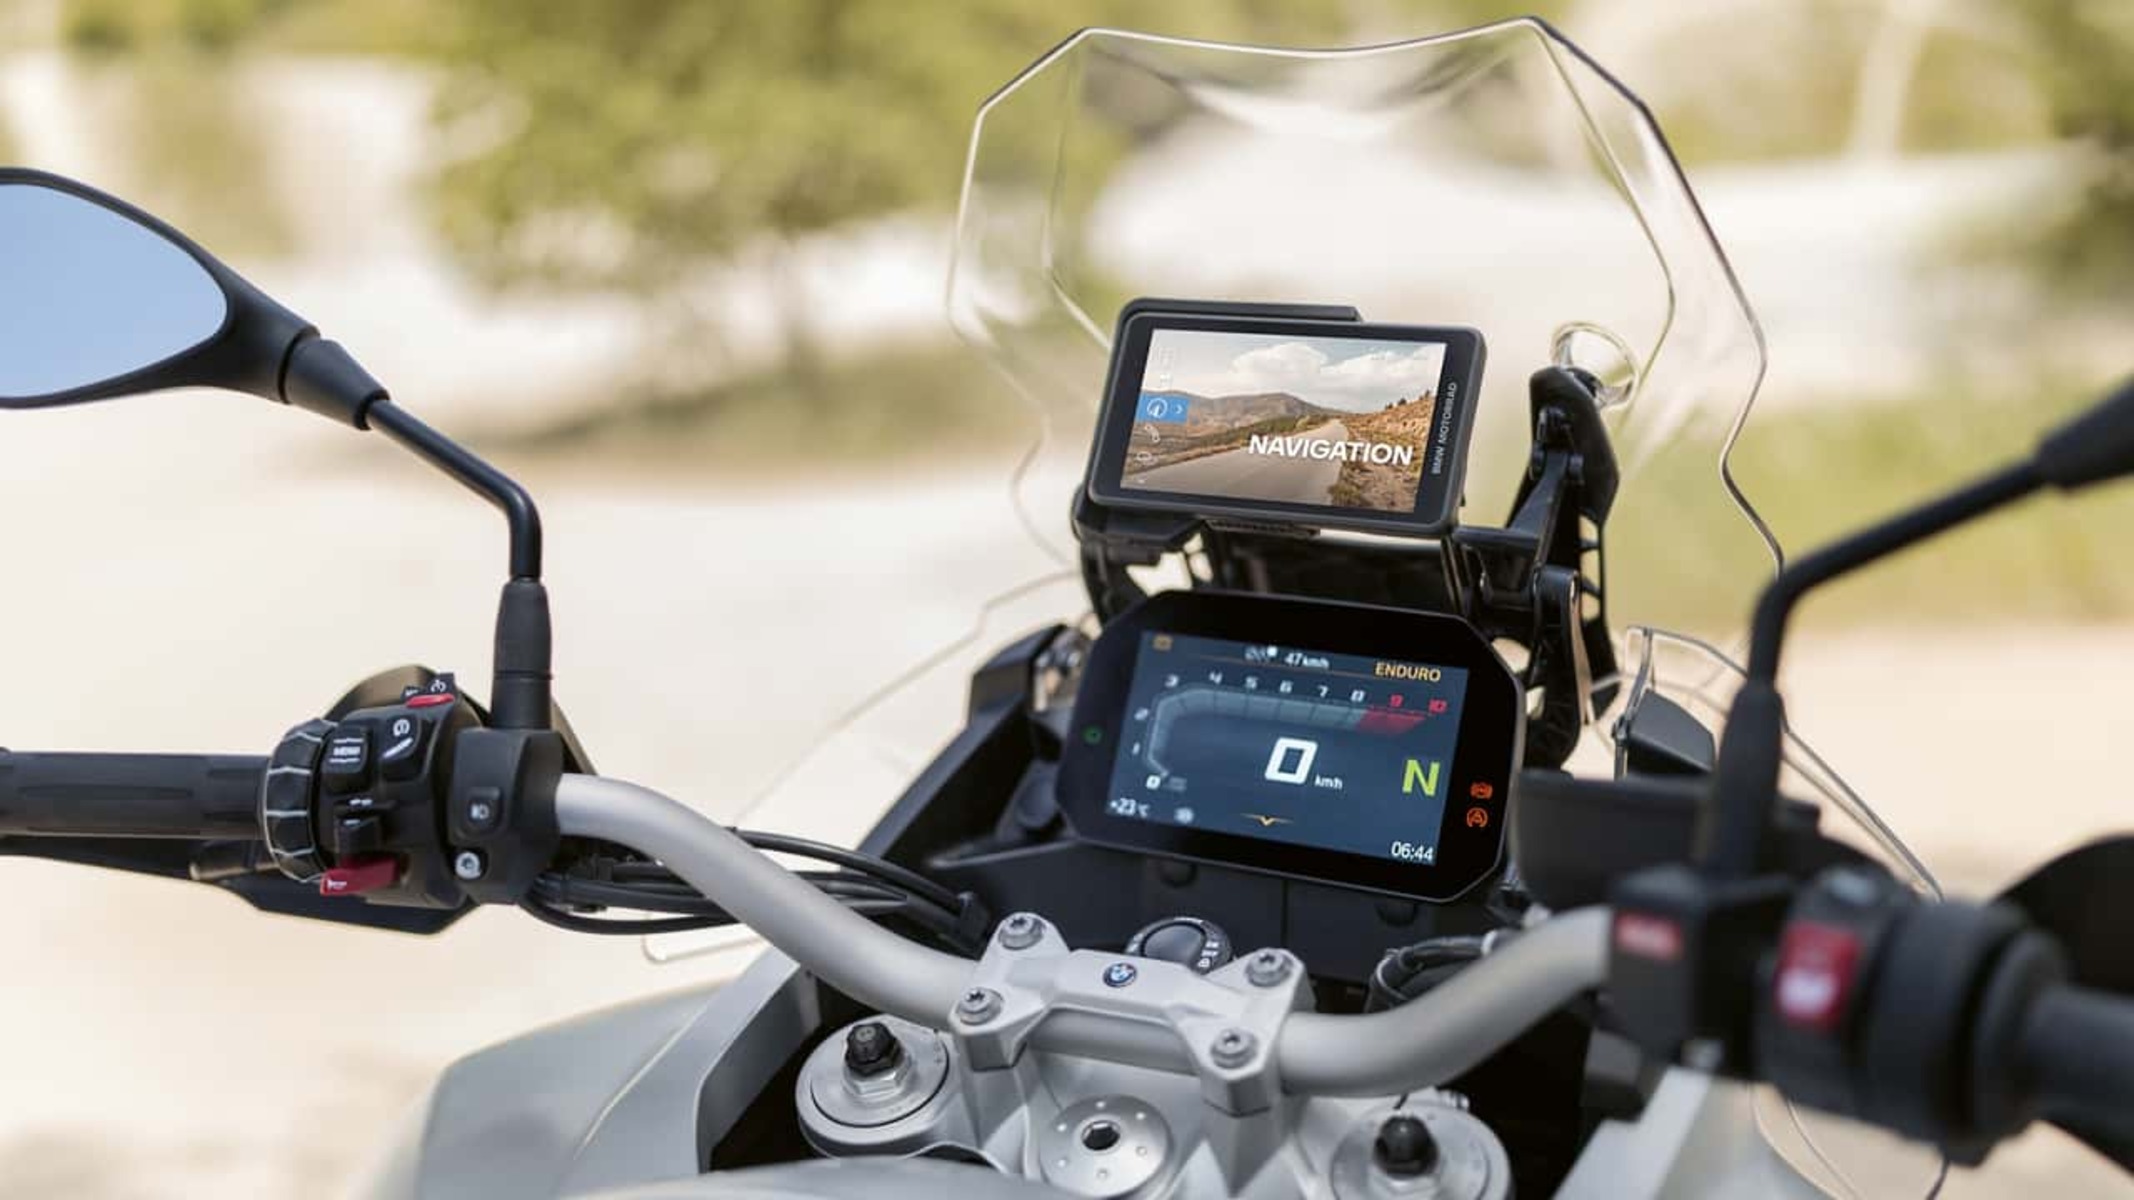 Biker Security: Strategically Placing A GPS Tracker On Your Motorcycle